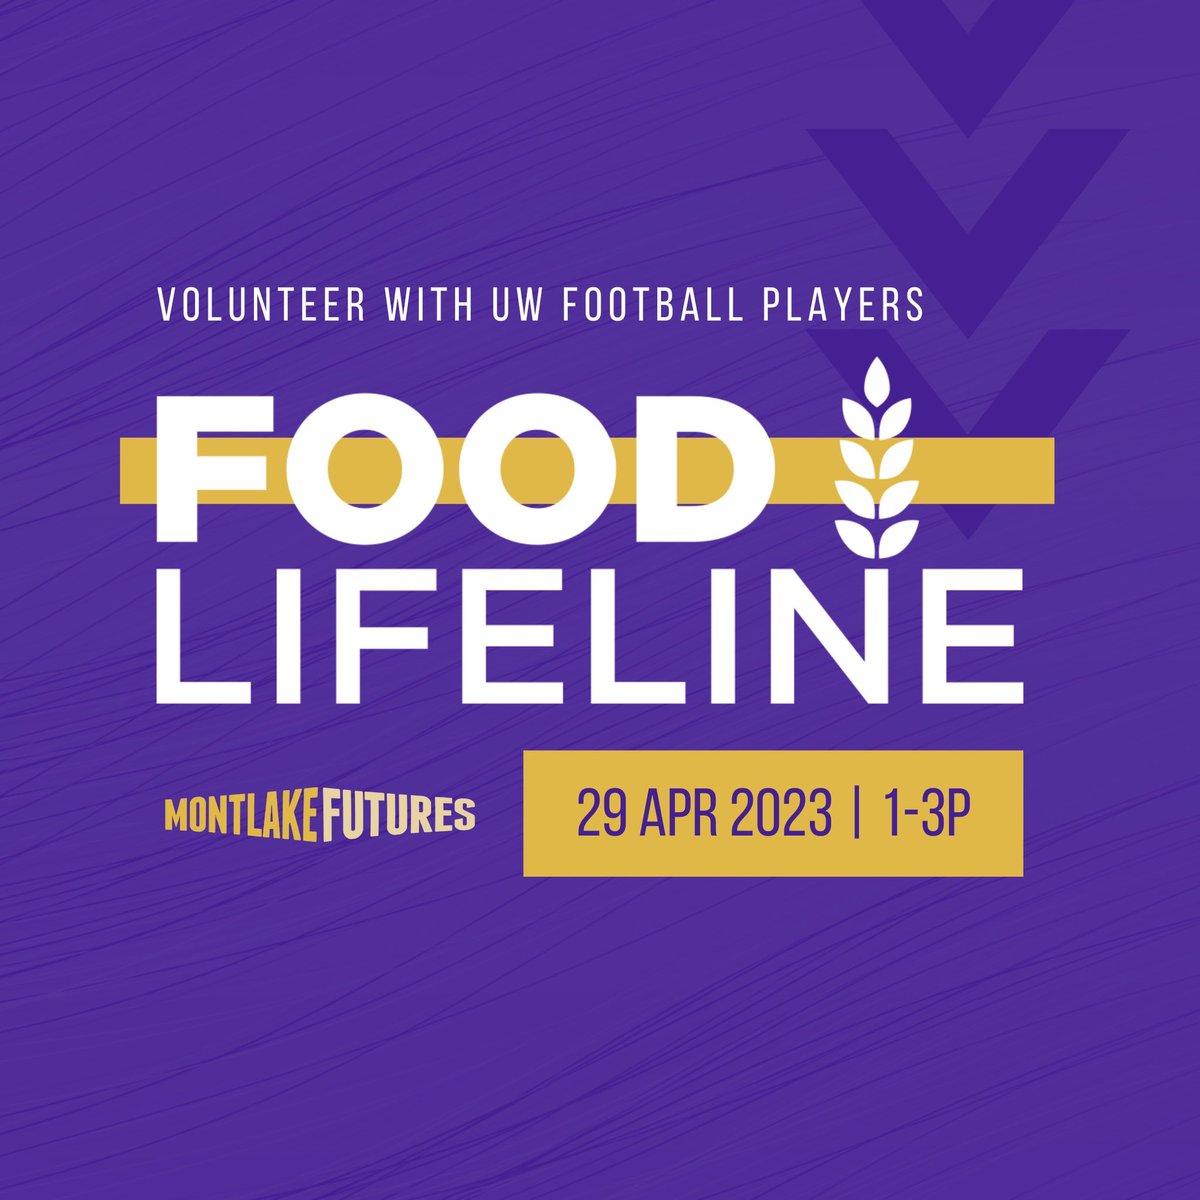 Pack food with UW football this weekend! Join my teammates and me as we volunteer with @FoodLifeline! This is a special, family-friendly volunteer opportunity. 📅 Sat April 29, 1-3pm 📍 Food Lifeline Packing Center, 815 S 96th St ✏️ Email katieko@foodlifeline.org to register